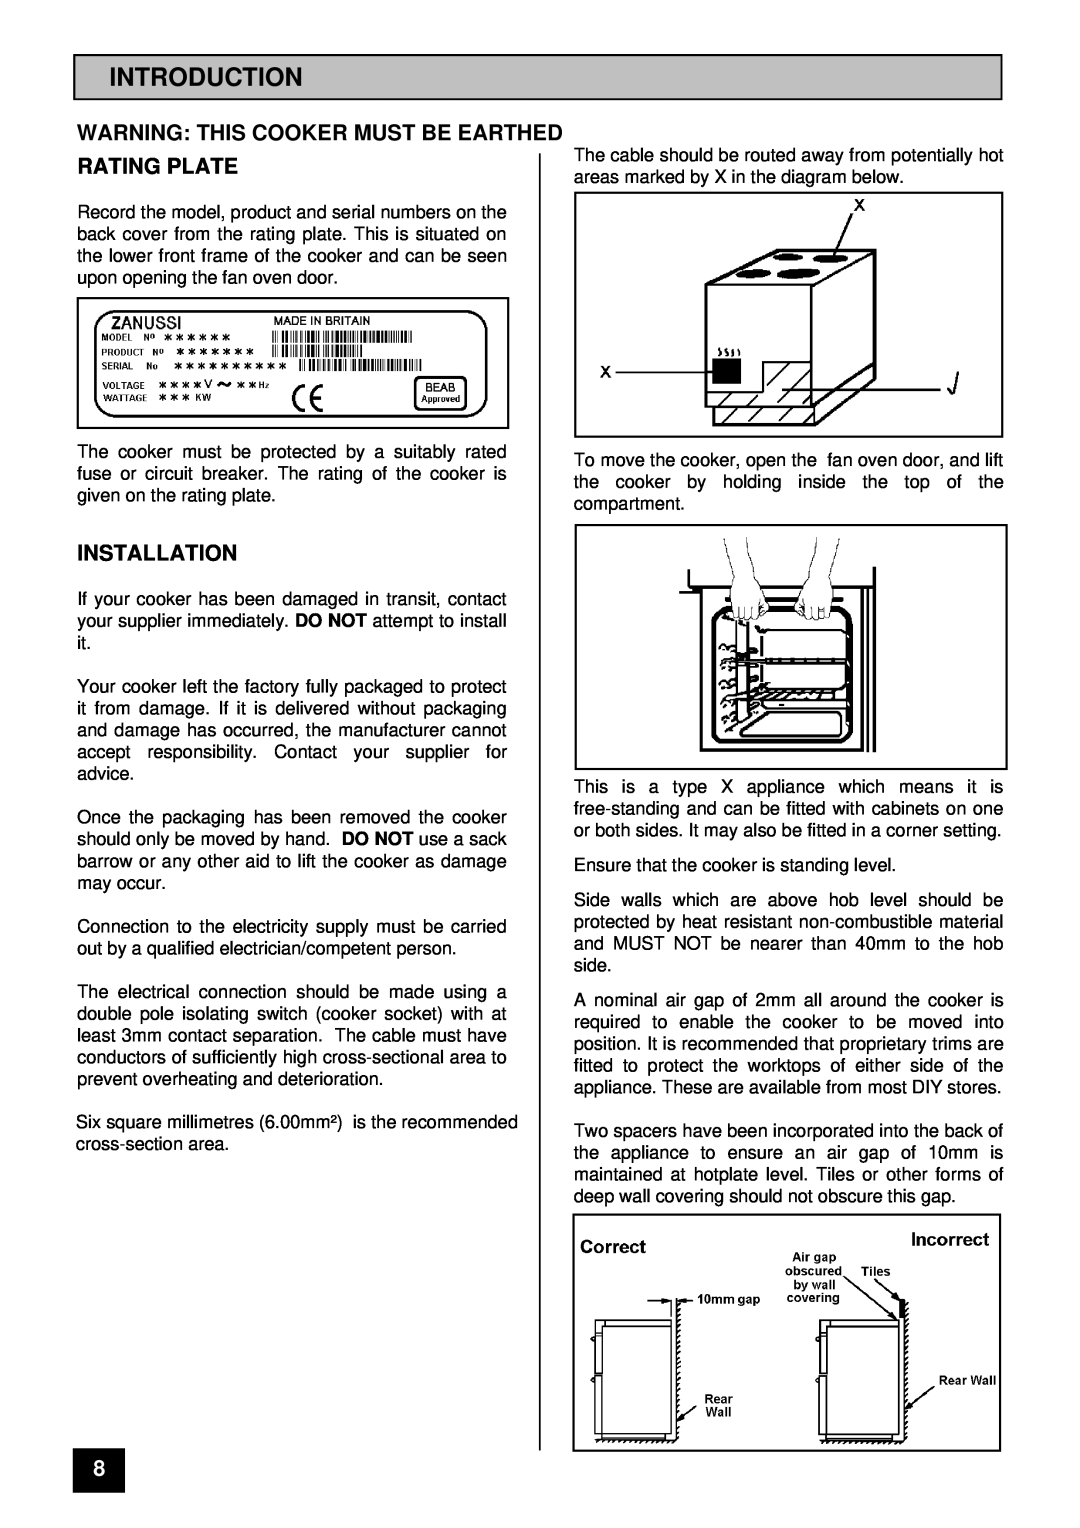 Zanussi ZCE 7350 manual Introduction, Warning This Cooker Must Be Earthed Rating Plate, Installation 